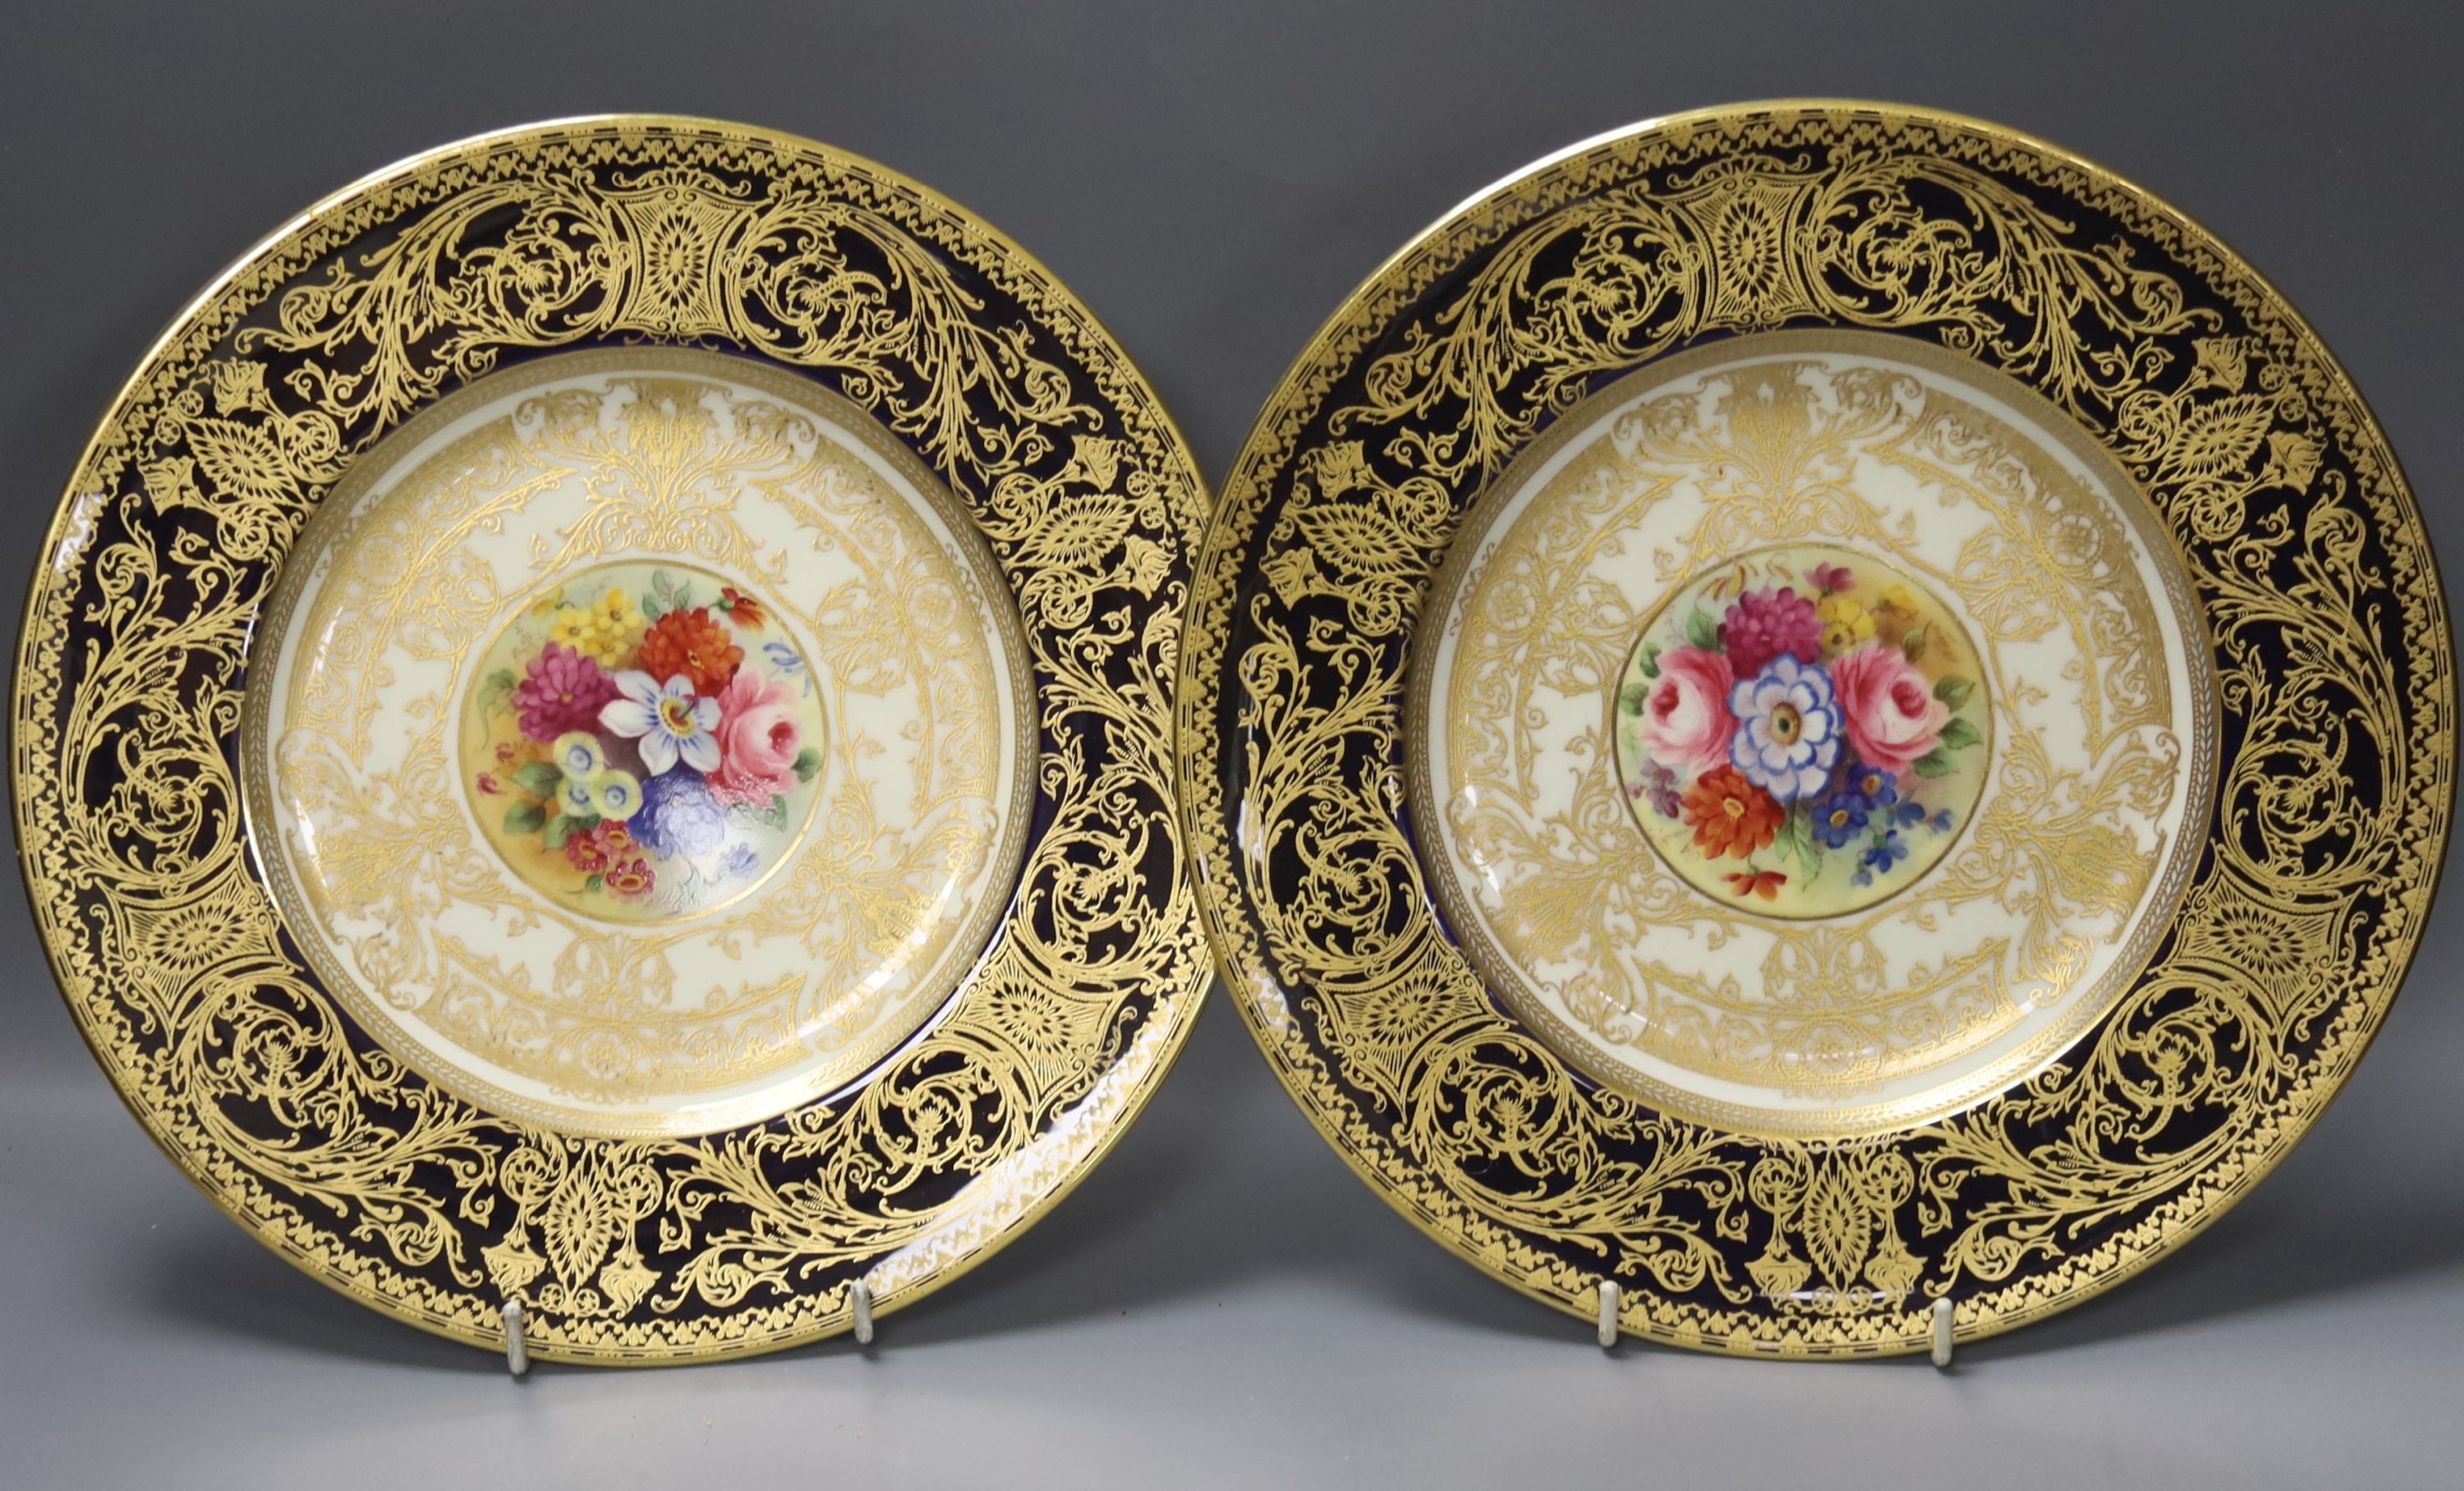 A group of hand-painted and other 19th century and later plates to include examples by Royal Worcester, George Jones, Royal Crown Derby, etc (18)